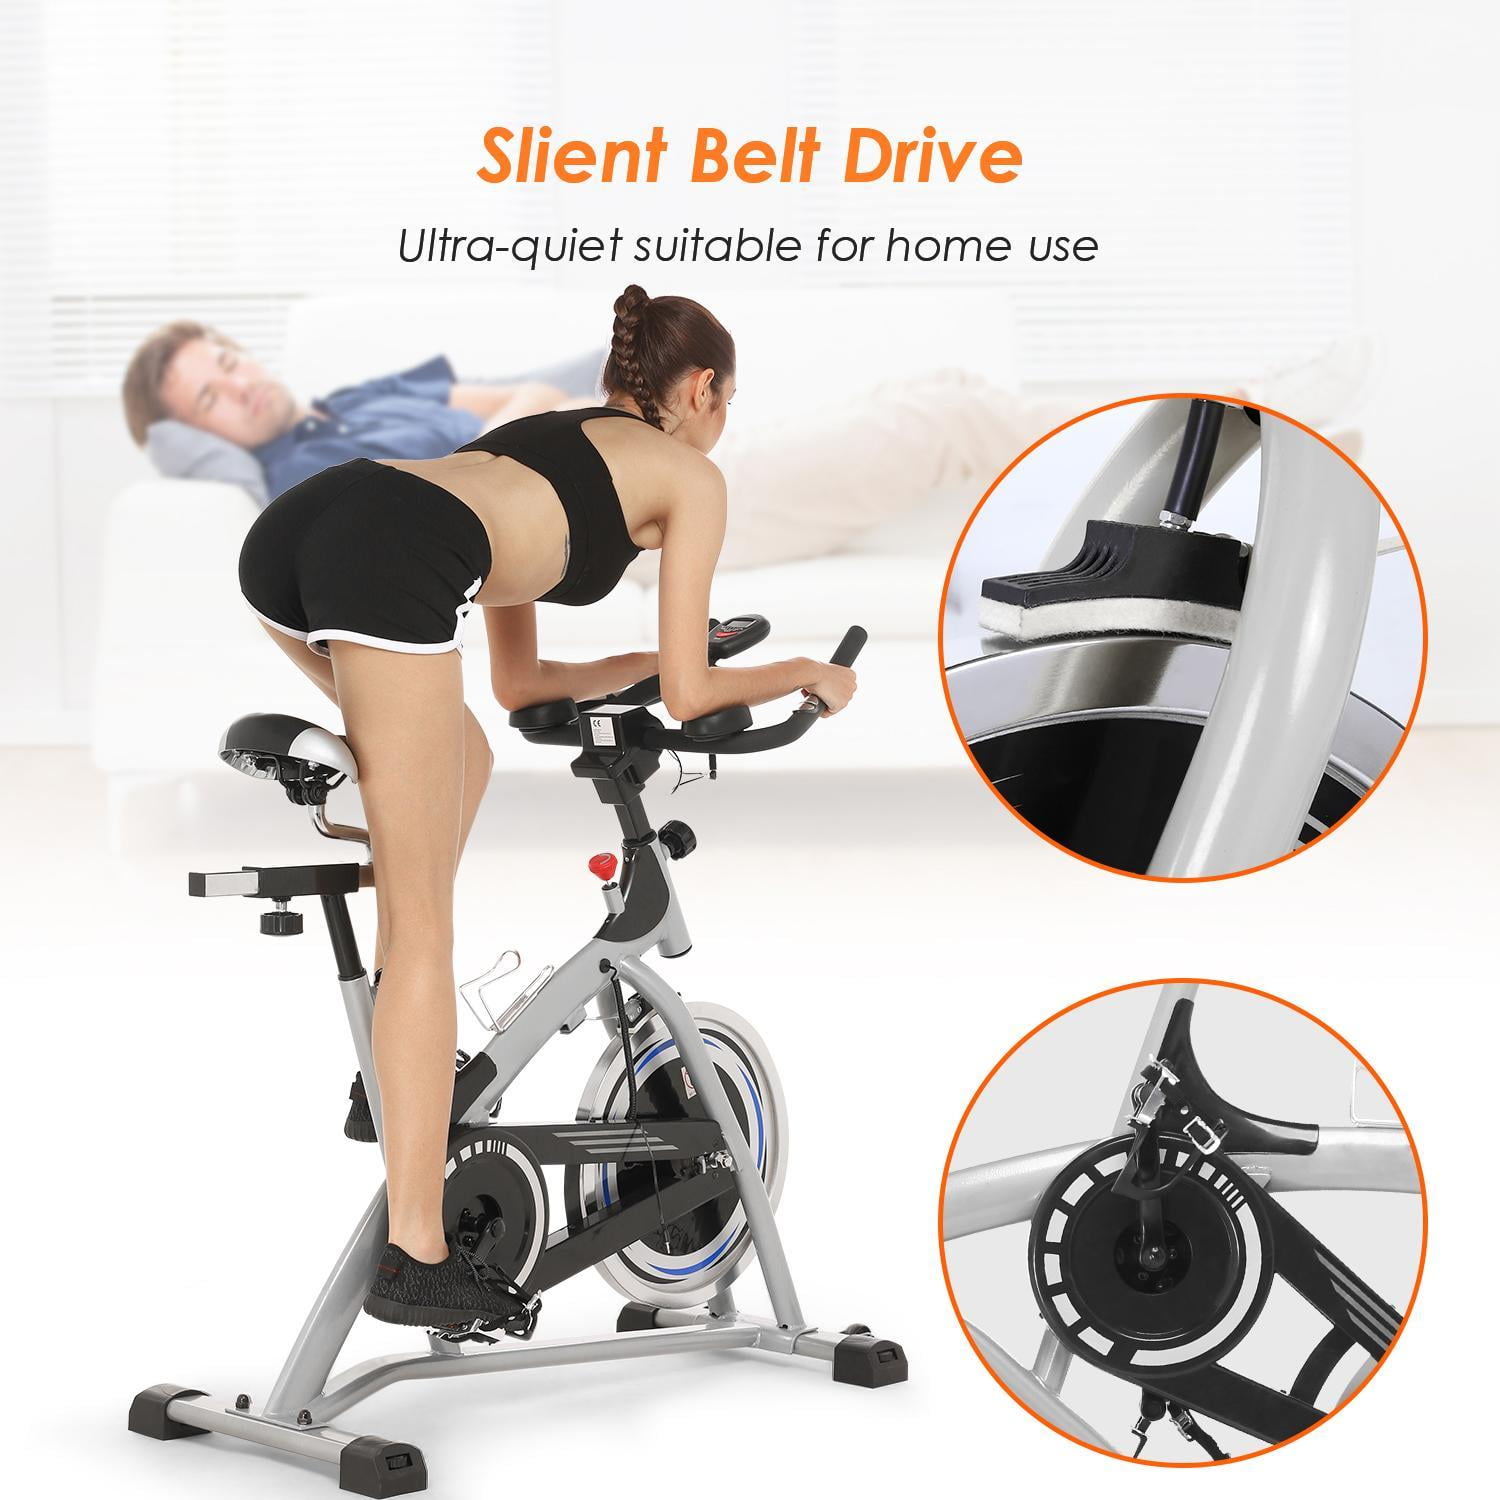 Quiet Smooth Belt Drive System ANCHEER Stationary Bike Adjustable Seat & Handlebars & Base 40 lbs Flywheel Indoor Cycling Exercise Bike with Heart Rate 